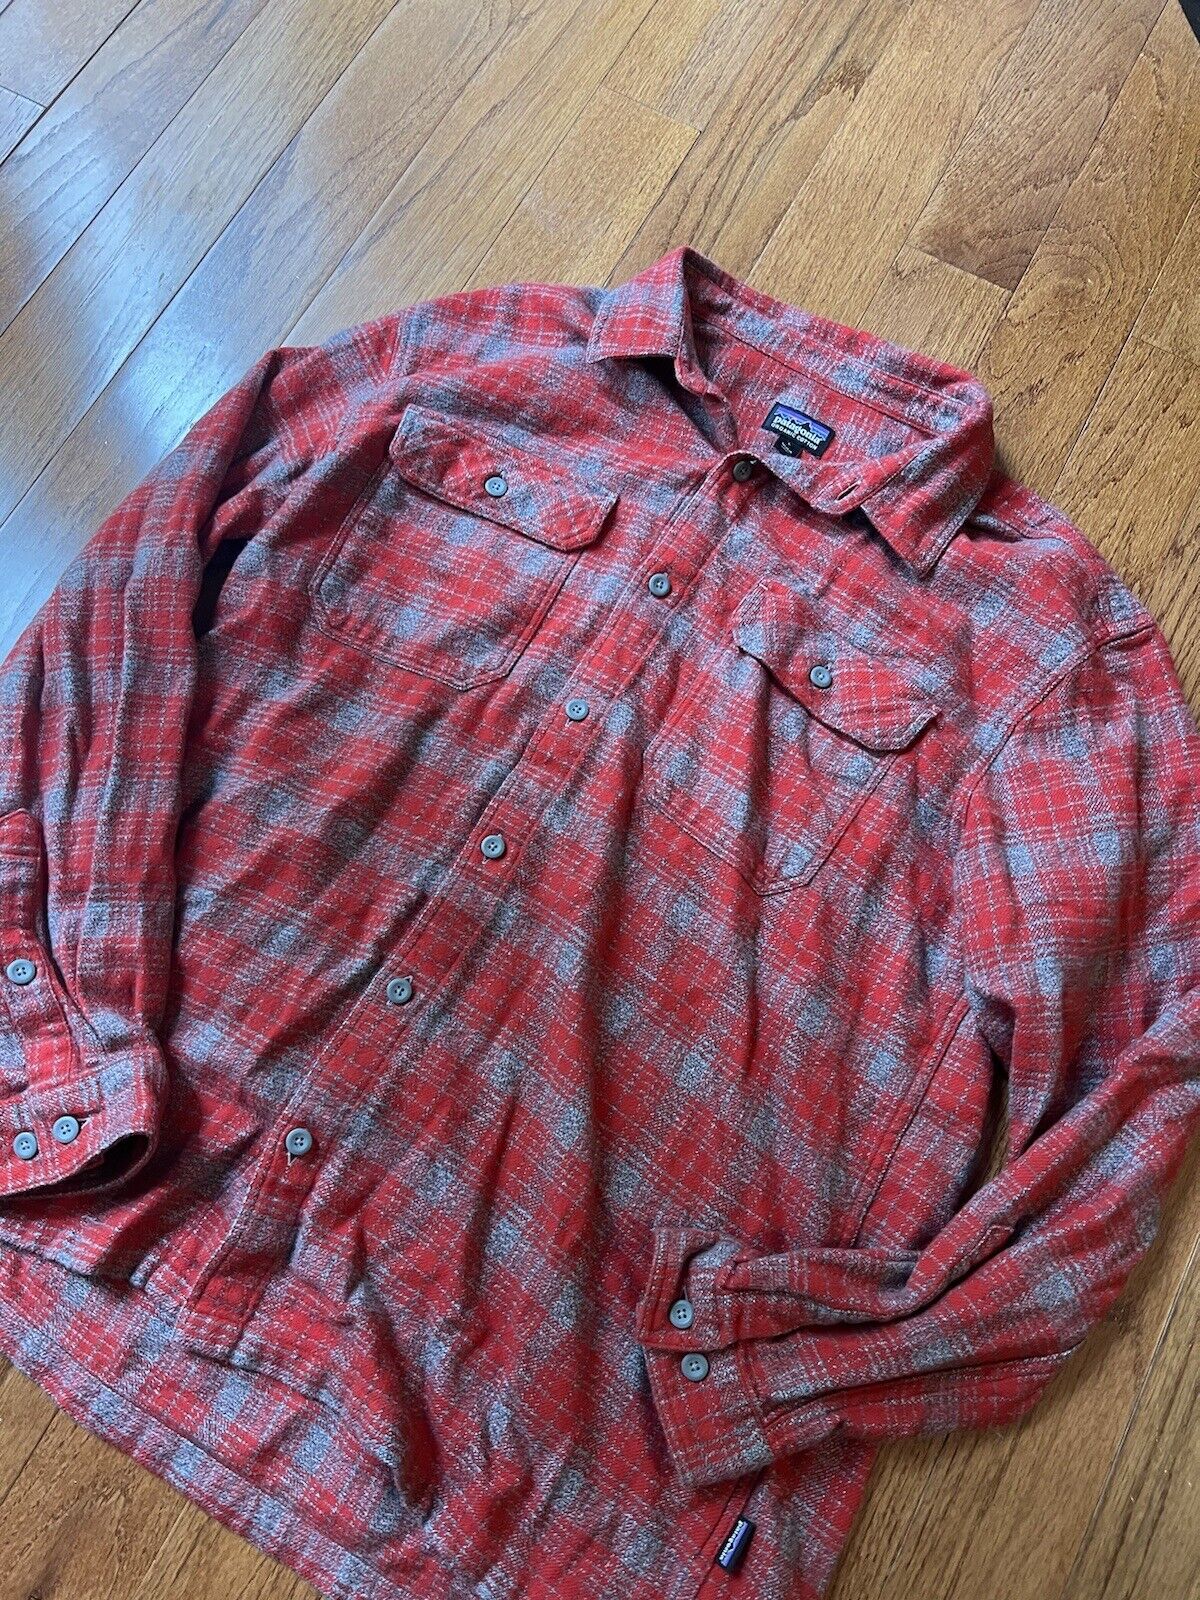 Patagonia Men’s L Organic Cotton Flannel Button Up Shirt Red Grey Striped